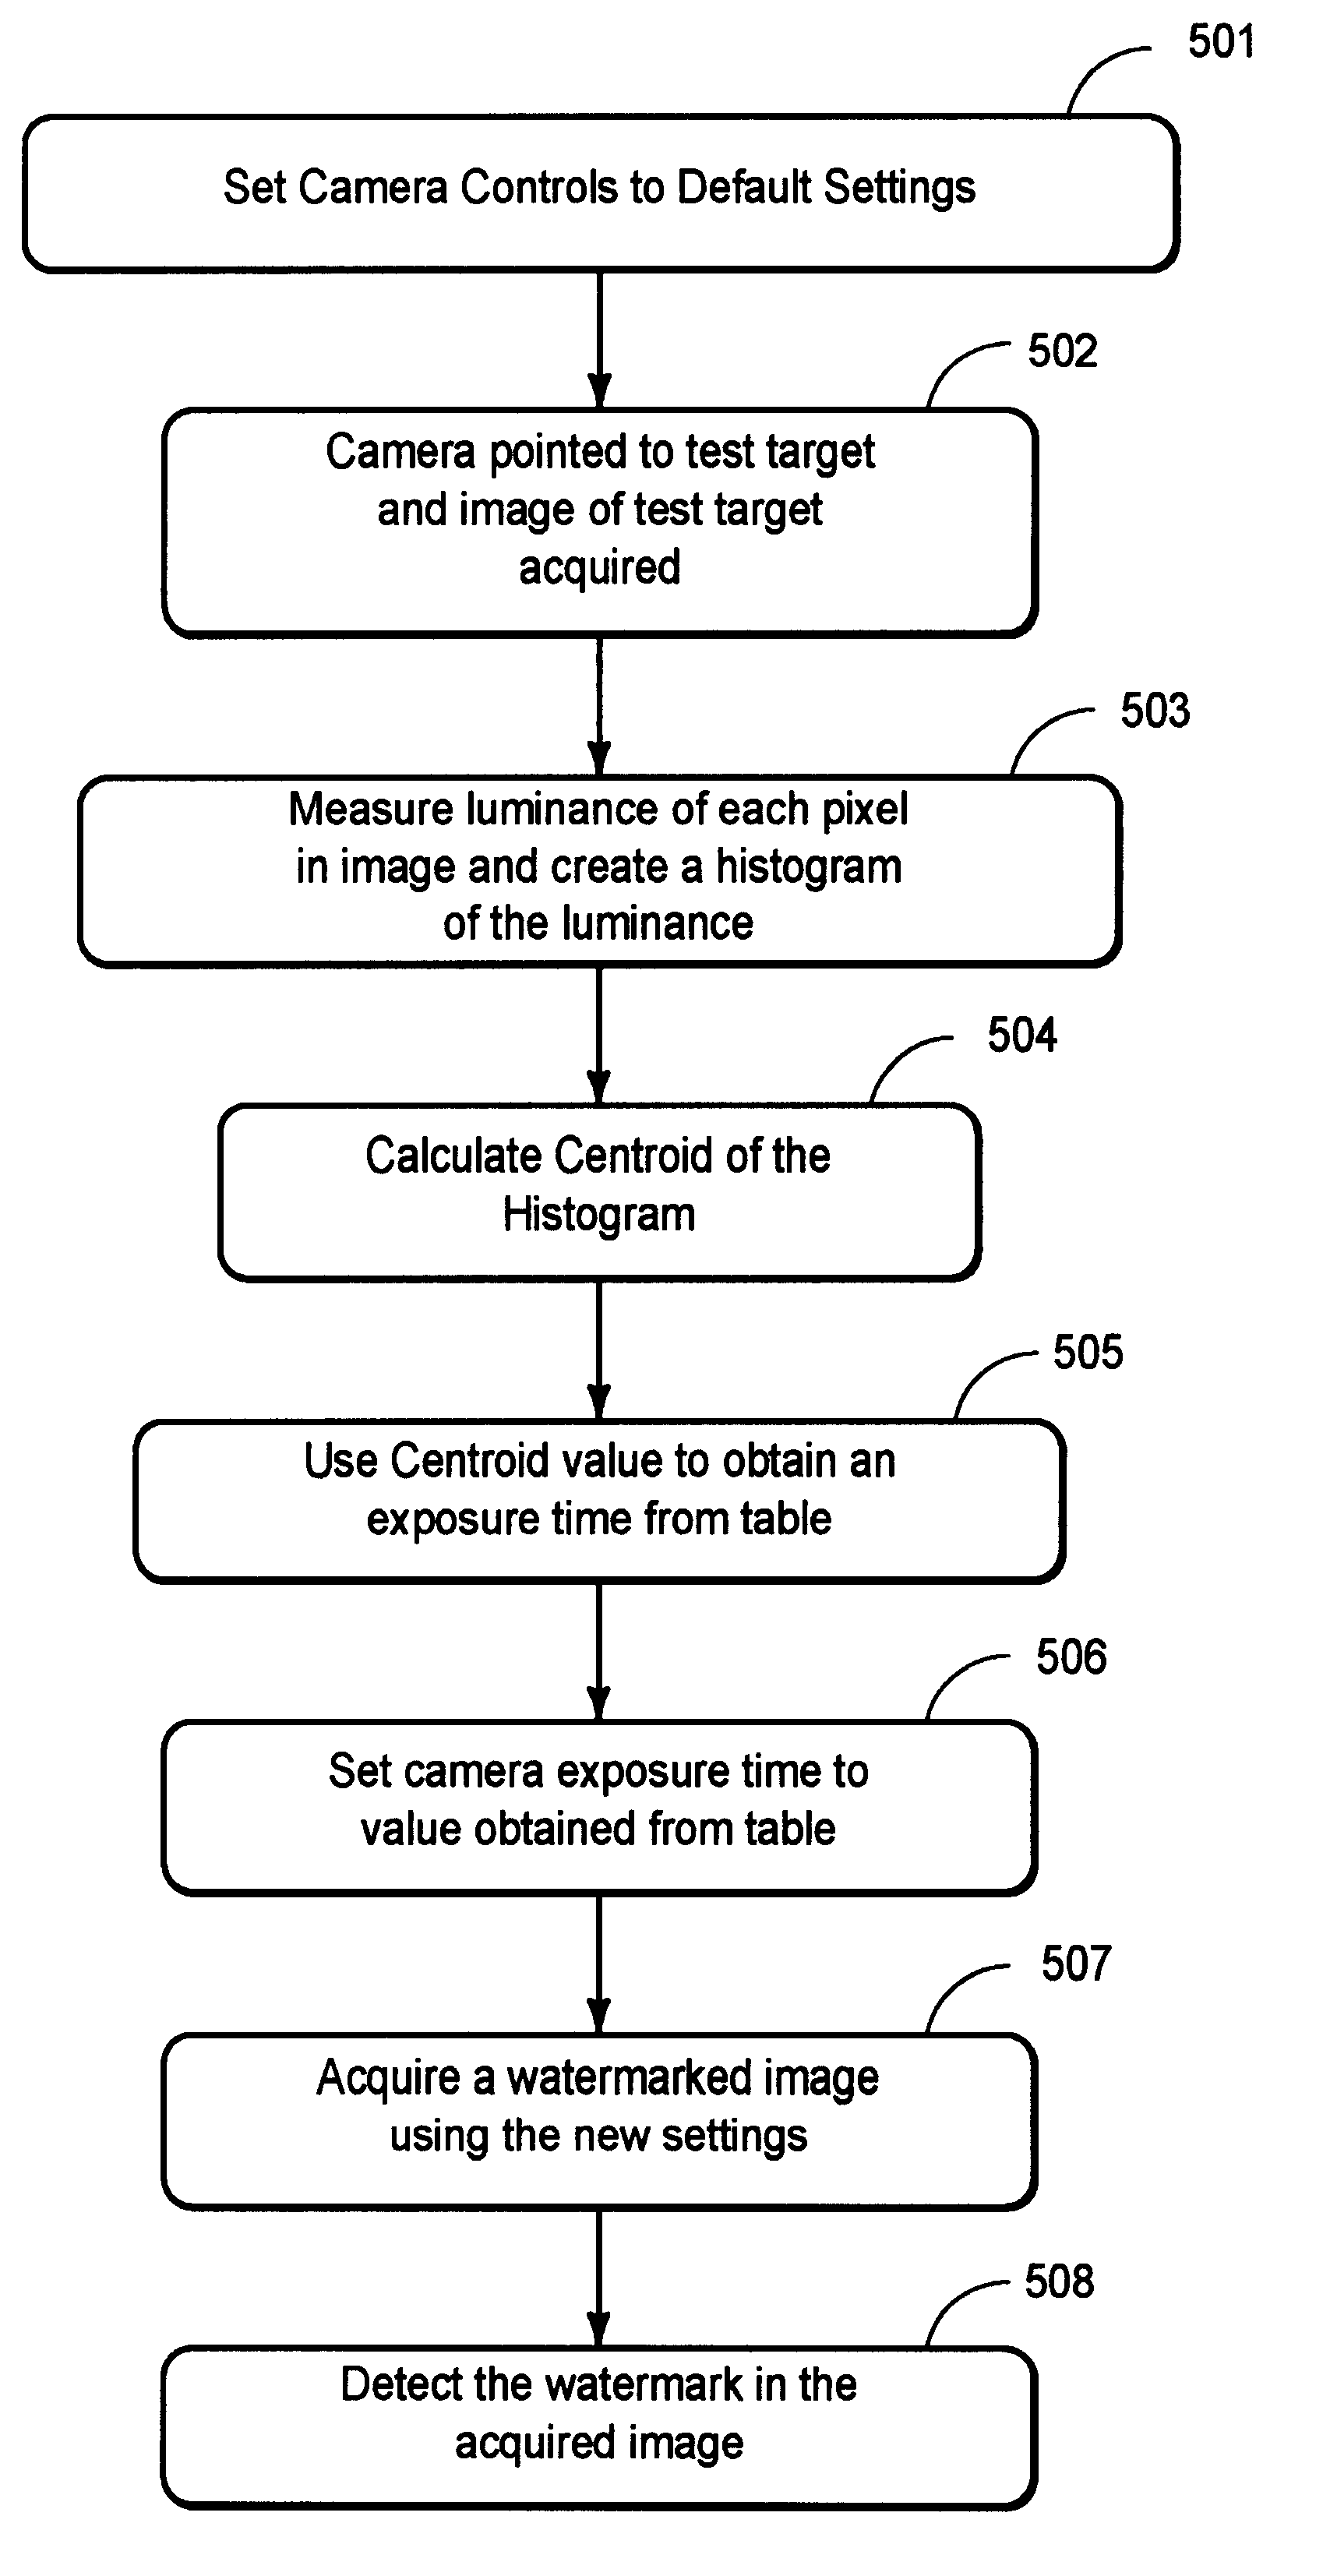 Adjusting an electronic camera to acquire a watermarked image